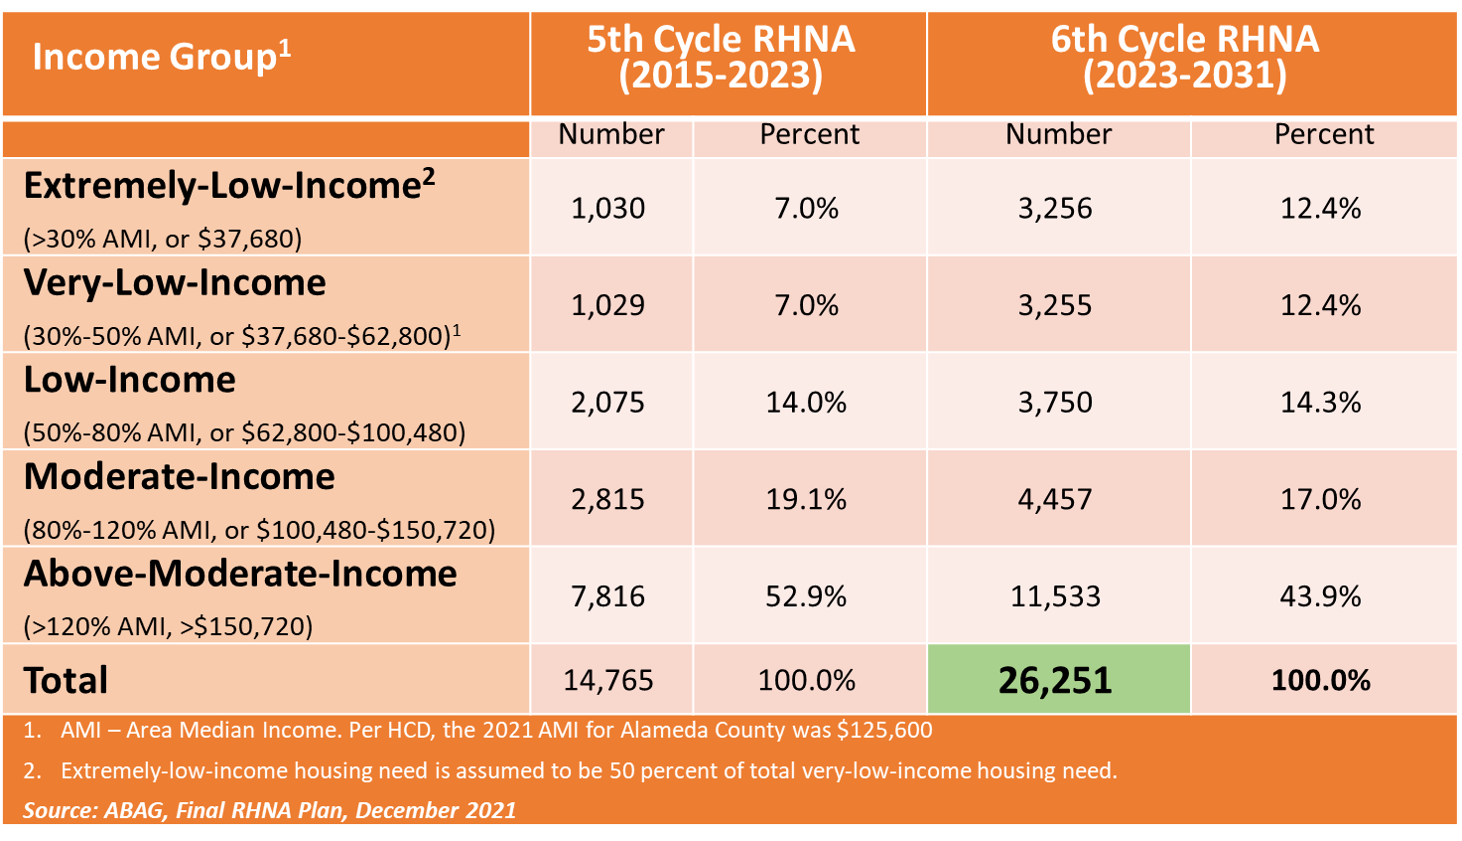 Table showing Oakland's RHNA Allocation in the 5th and 6th Cycles